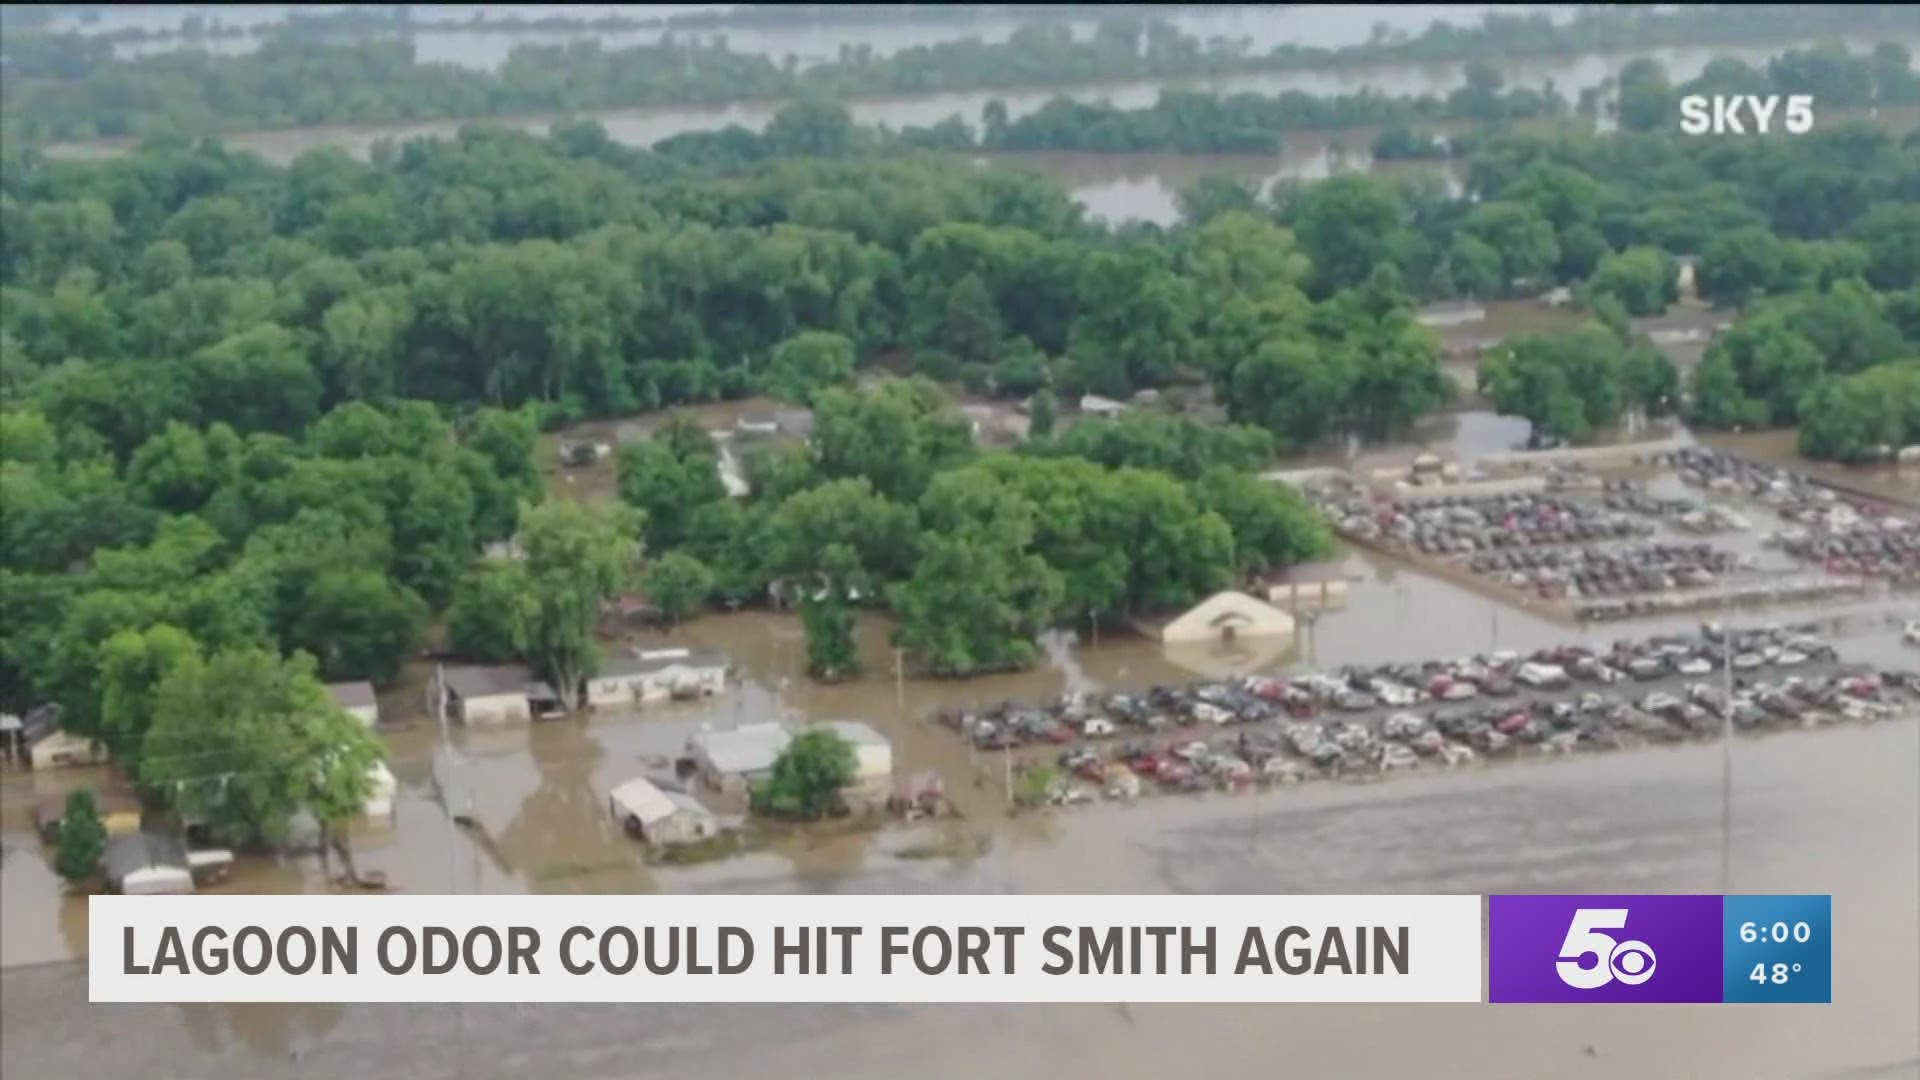 A foul smell could soon again hit Fort Smith during the lagoon clean out